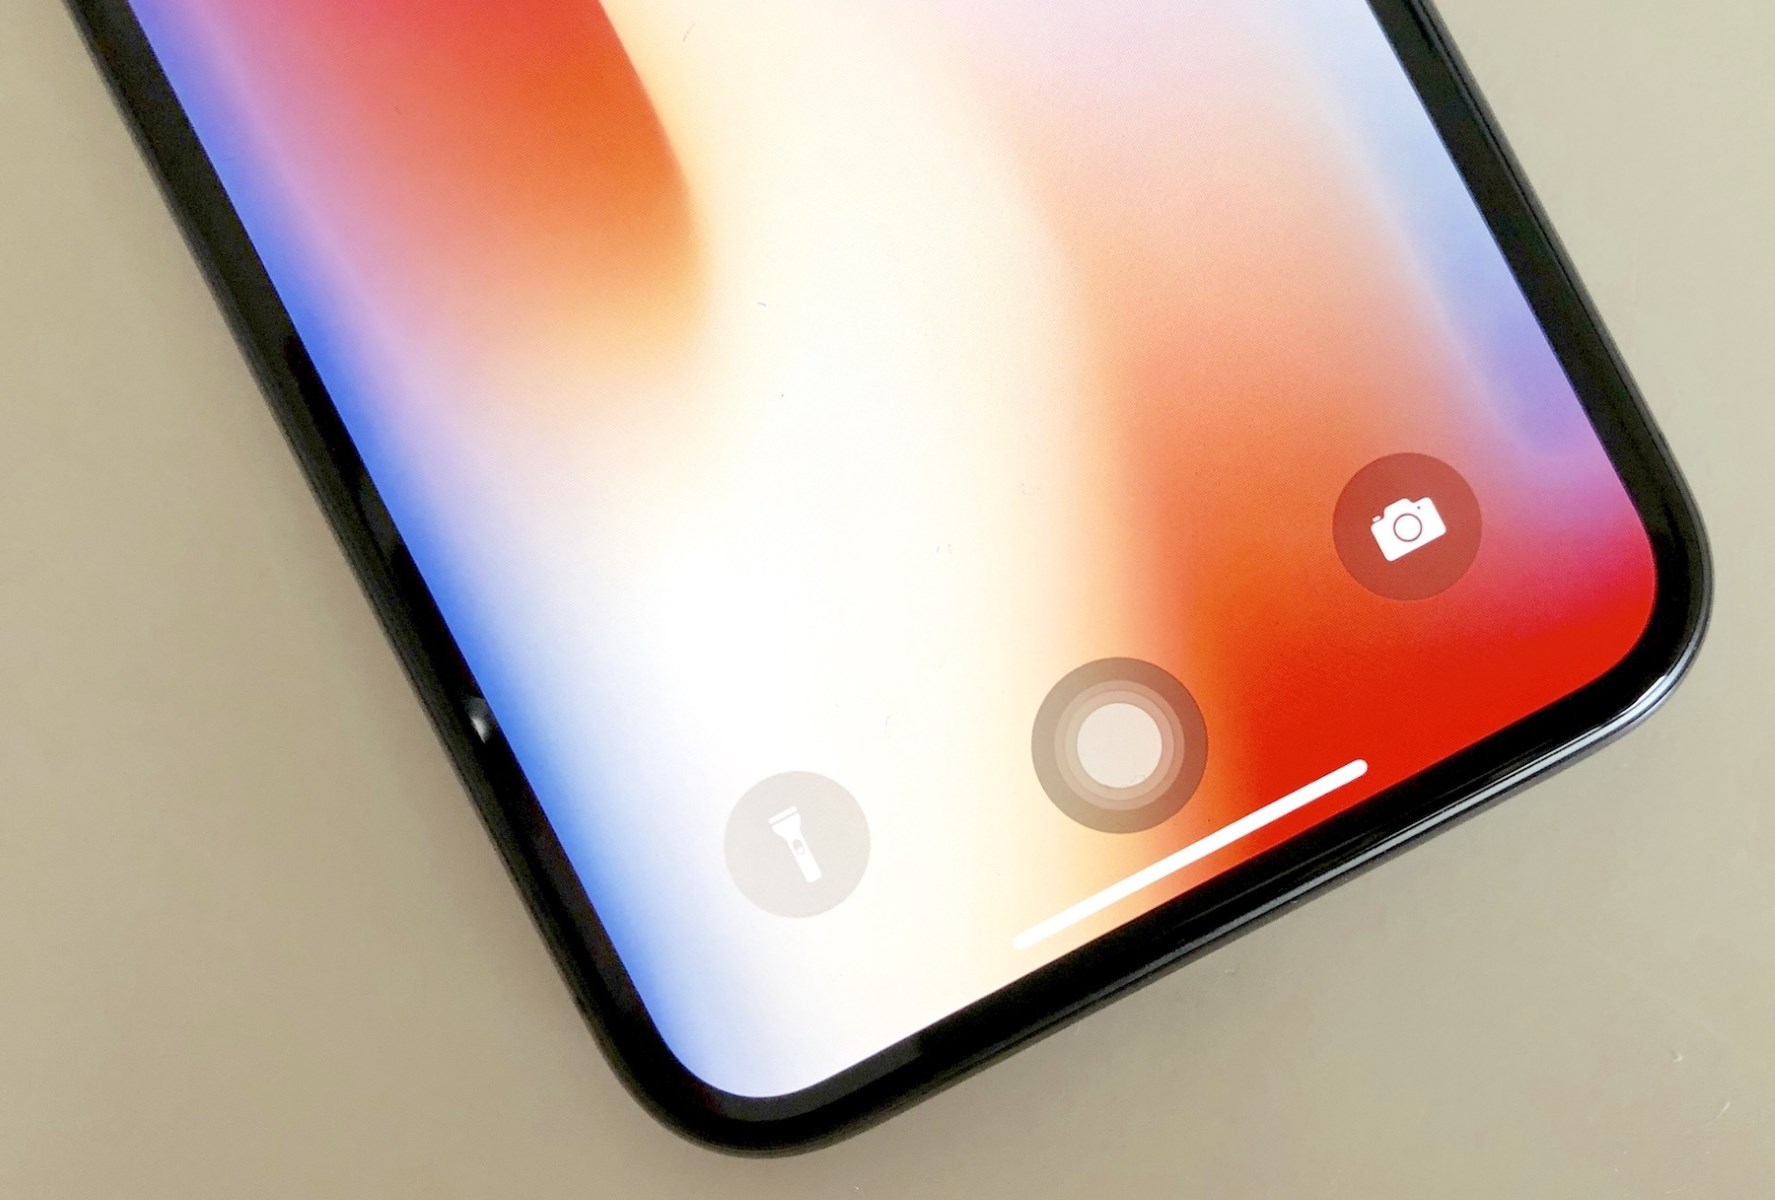 Home Button Removal: Adjusting To IPhone 11 Without A Physical Home Button